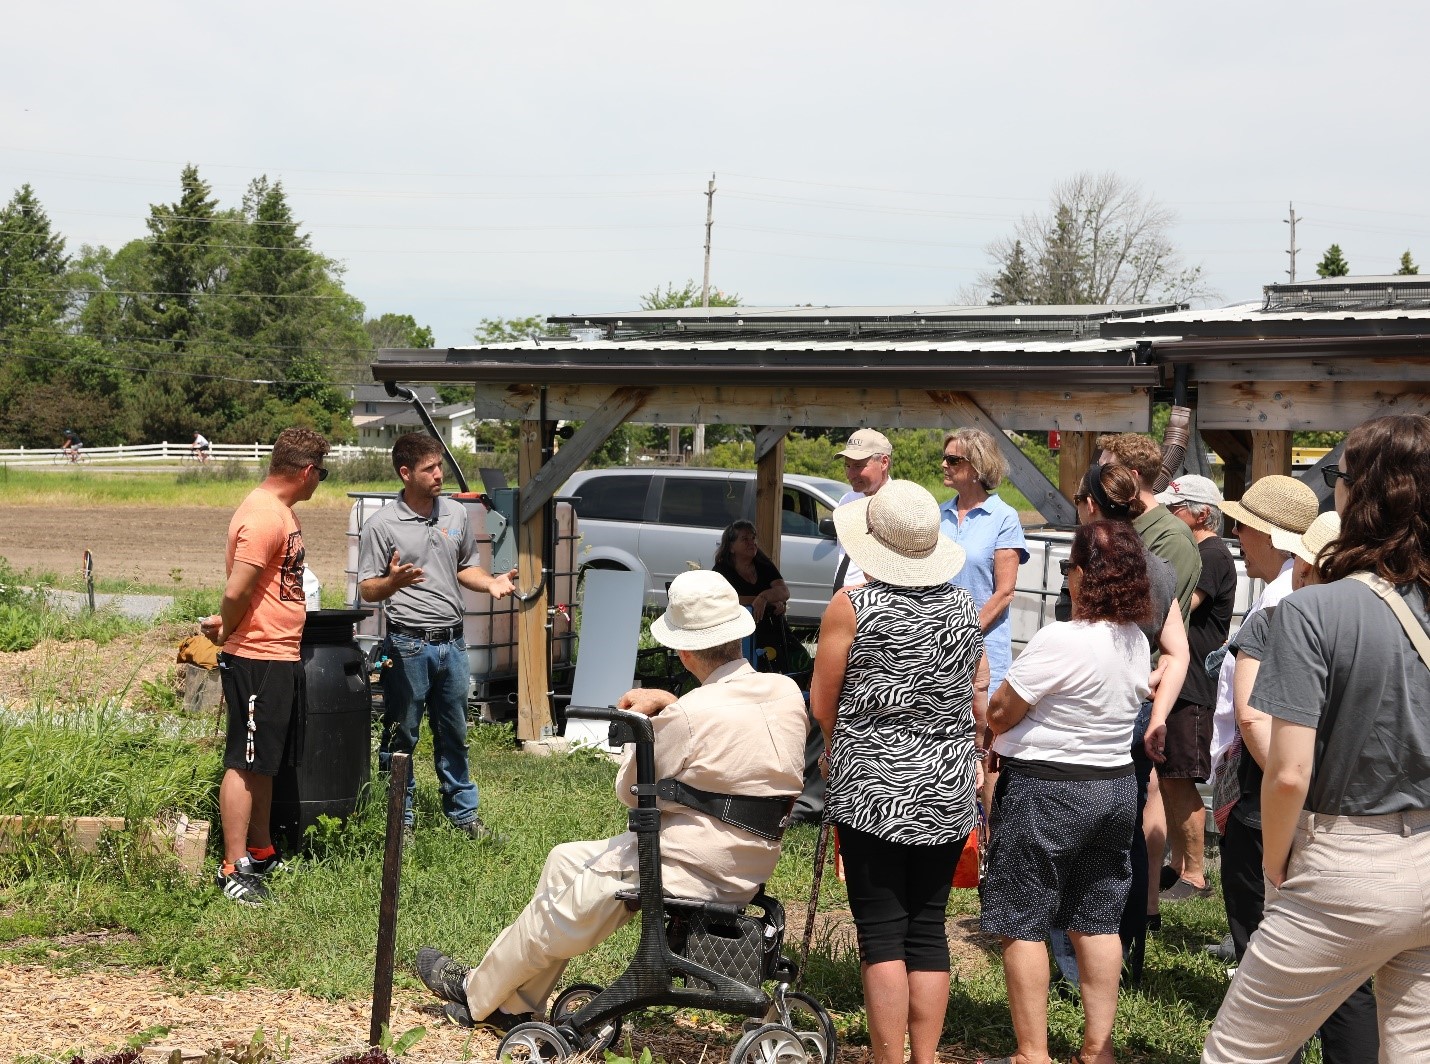 Shawn Melnyk (All Our Relations Land Trust) and Eric Collins (CDK Energy Solutions) speak to attendees about how the solar-powered irrigation system works.